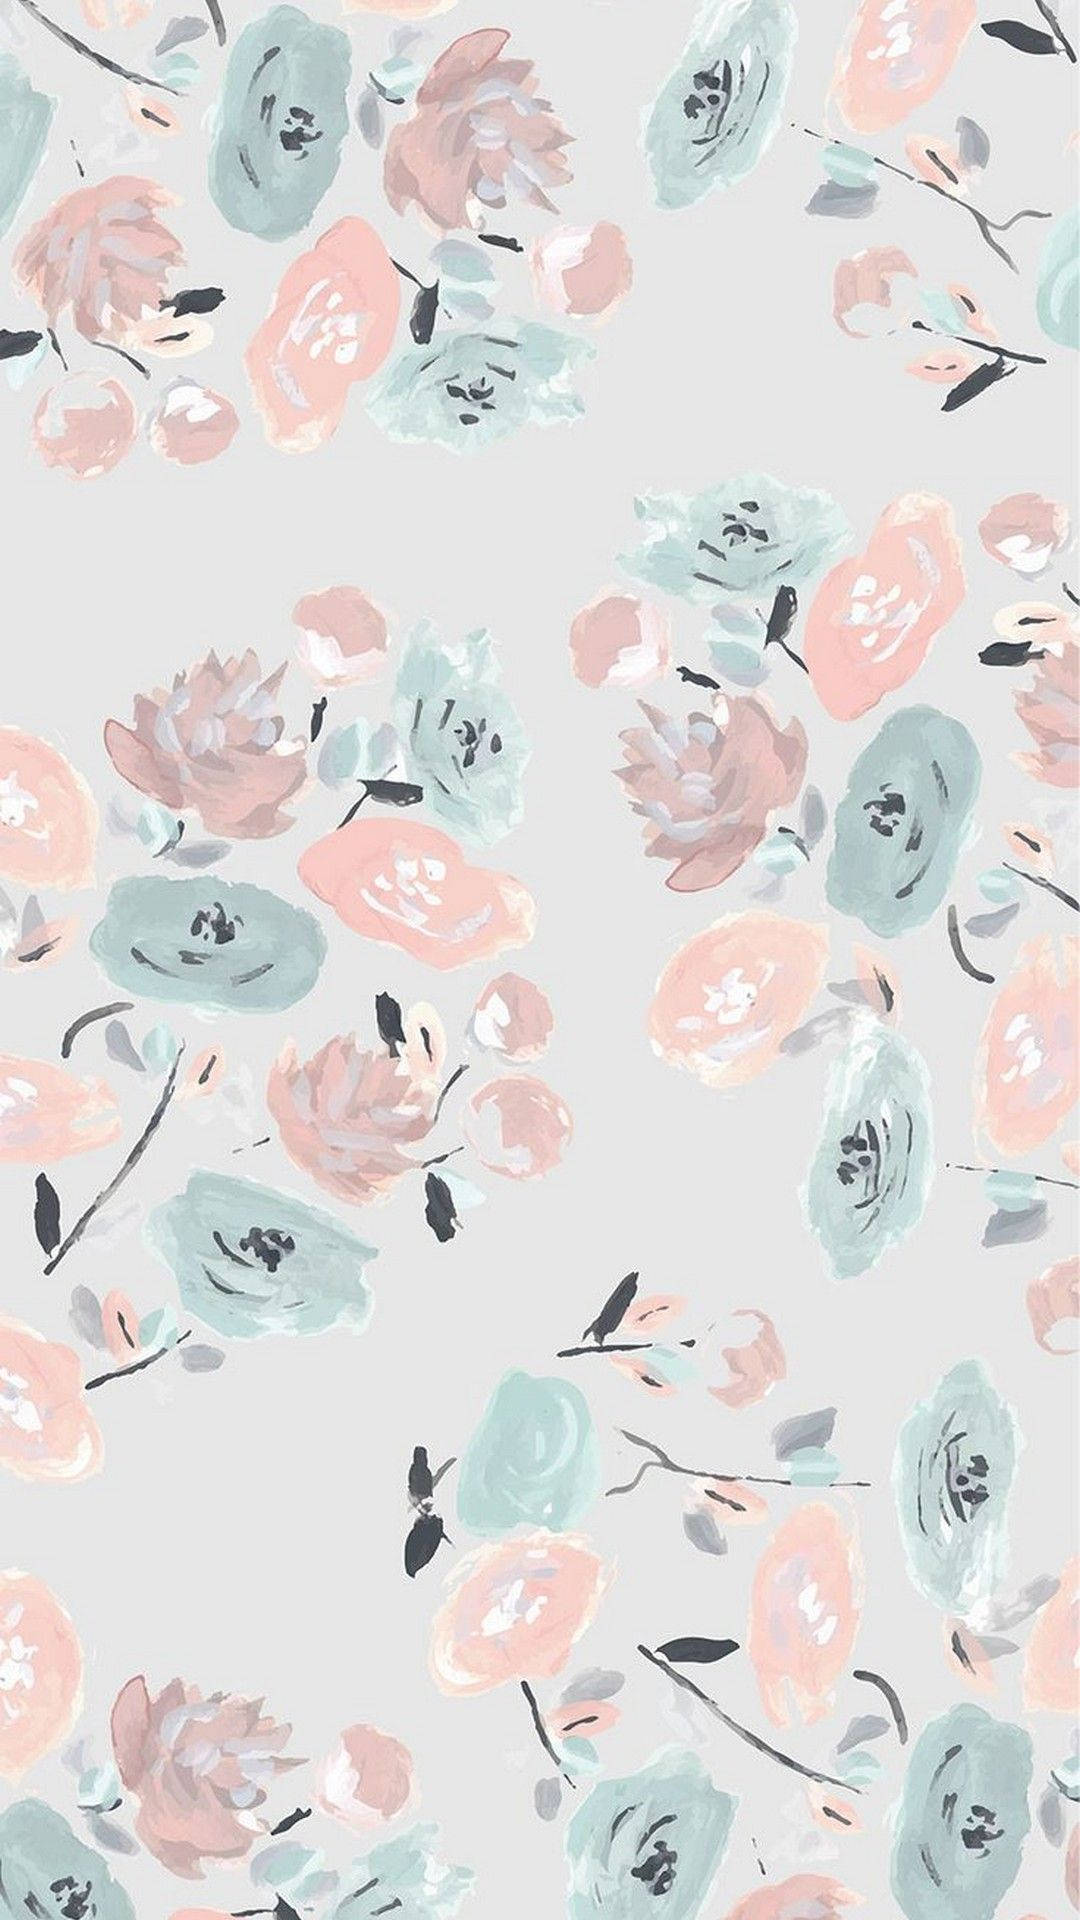 Get Ready for Spring with the Cute Phone Wallpaper